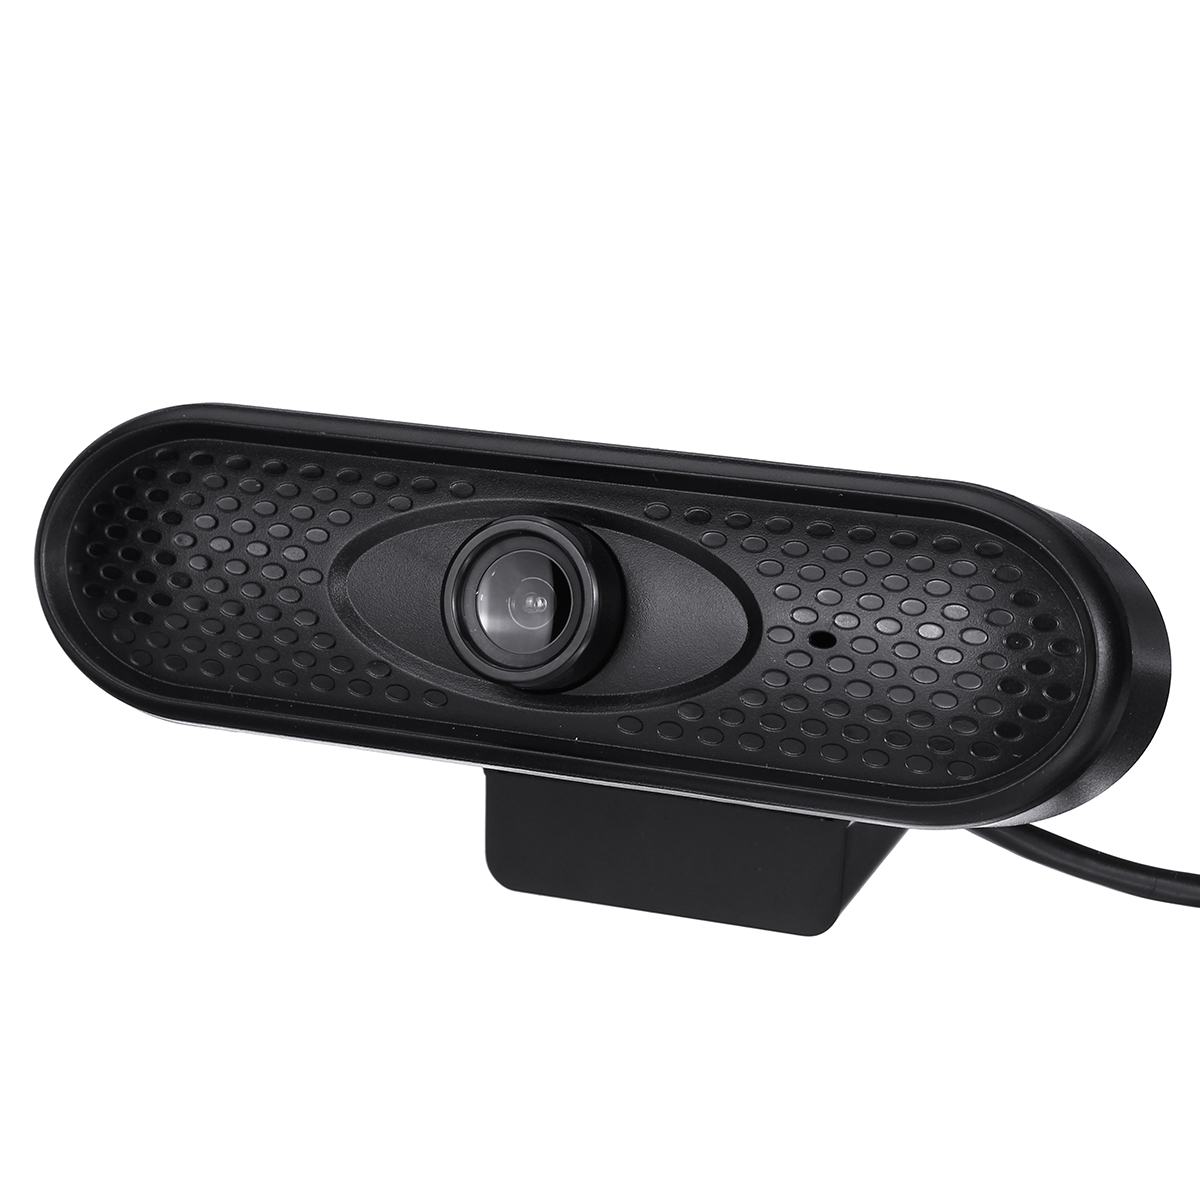 1080P-HD-USB-Webcam-Conference-Live-Manual-Focus-Computer-Camera-Built-in-Omni-directional-Micphone--1674541-2